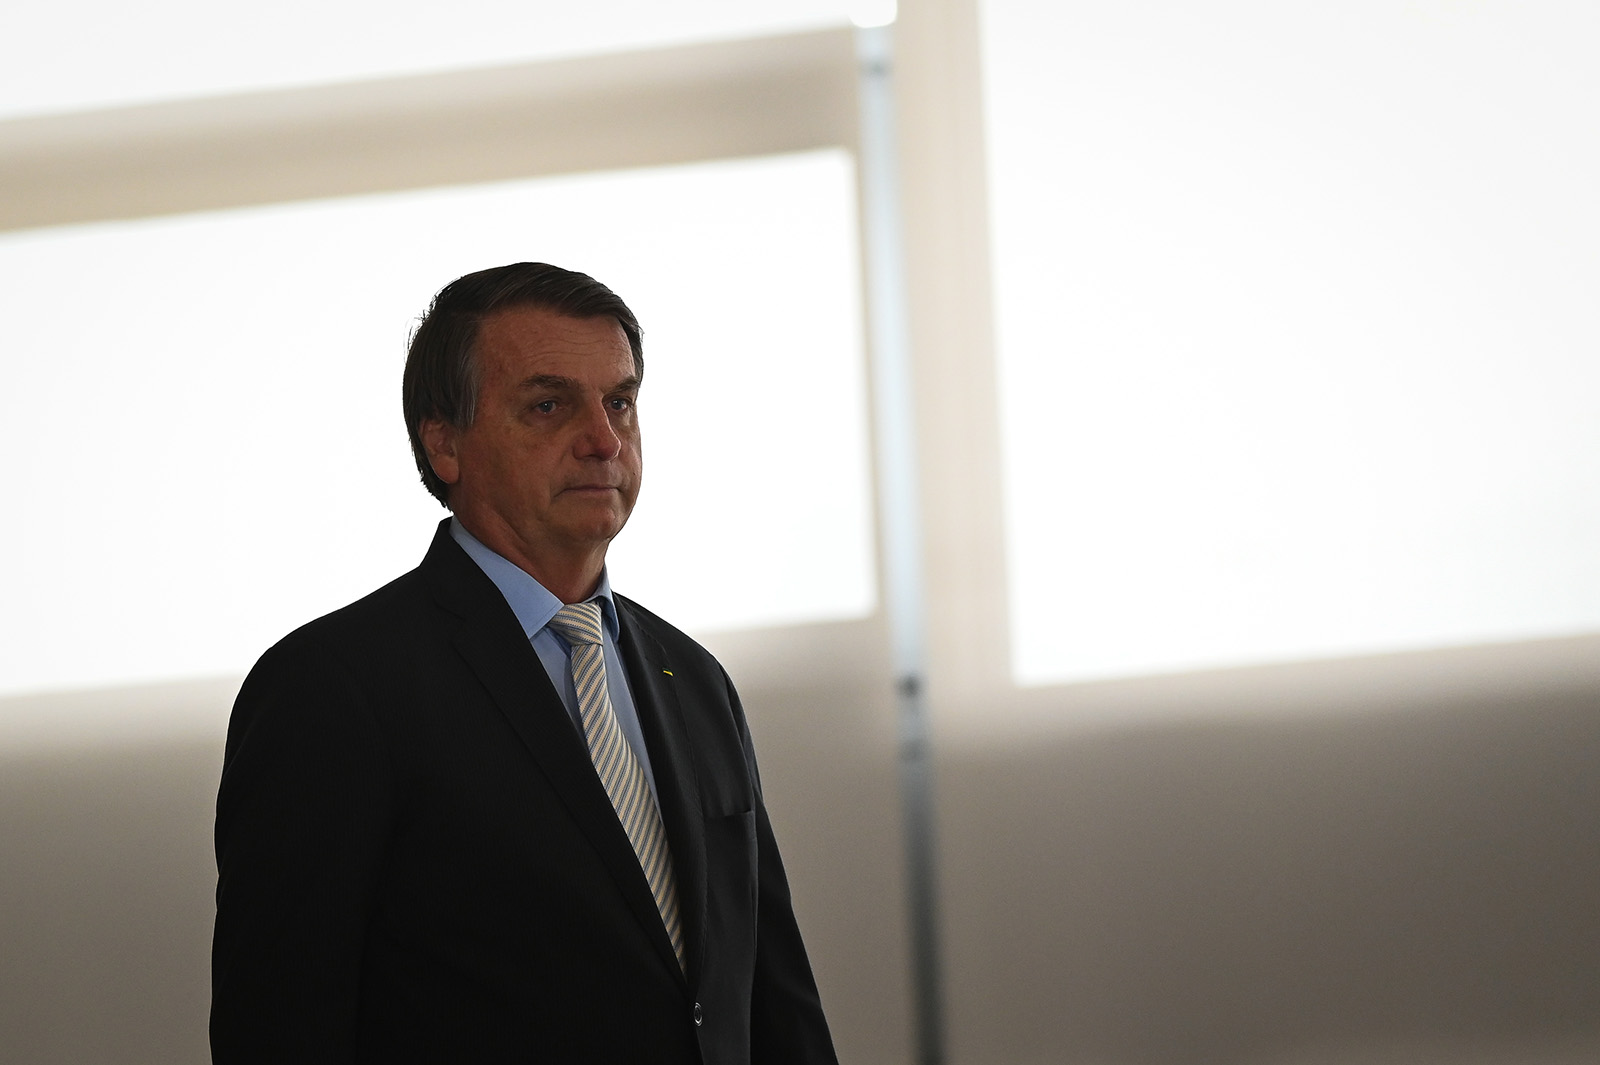 President of Brazil Jair Bolsonaro arrives for the opening ceremony of the forum "The Control in Combating Corruption" at Planalto Palace on December 9, 2020 in Brasilia. 